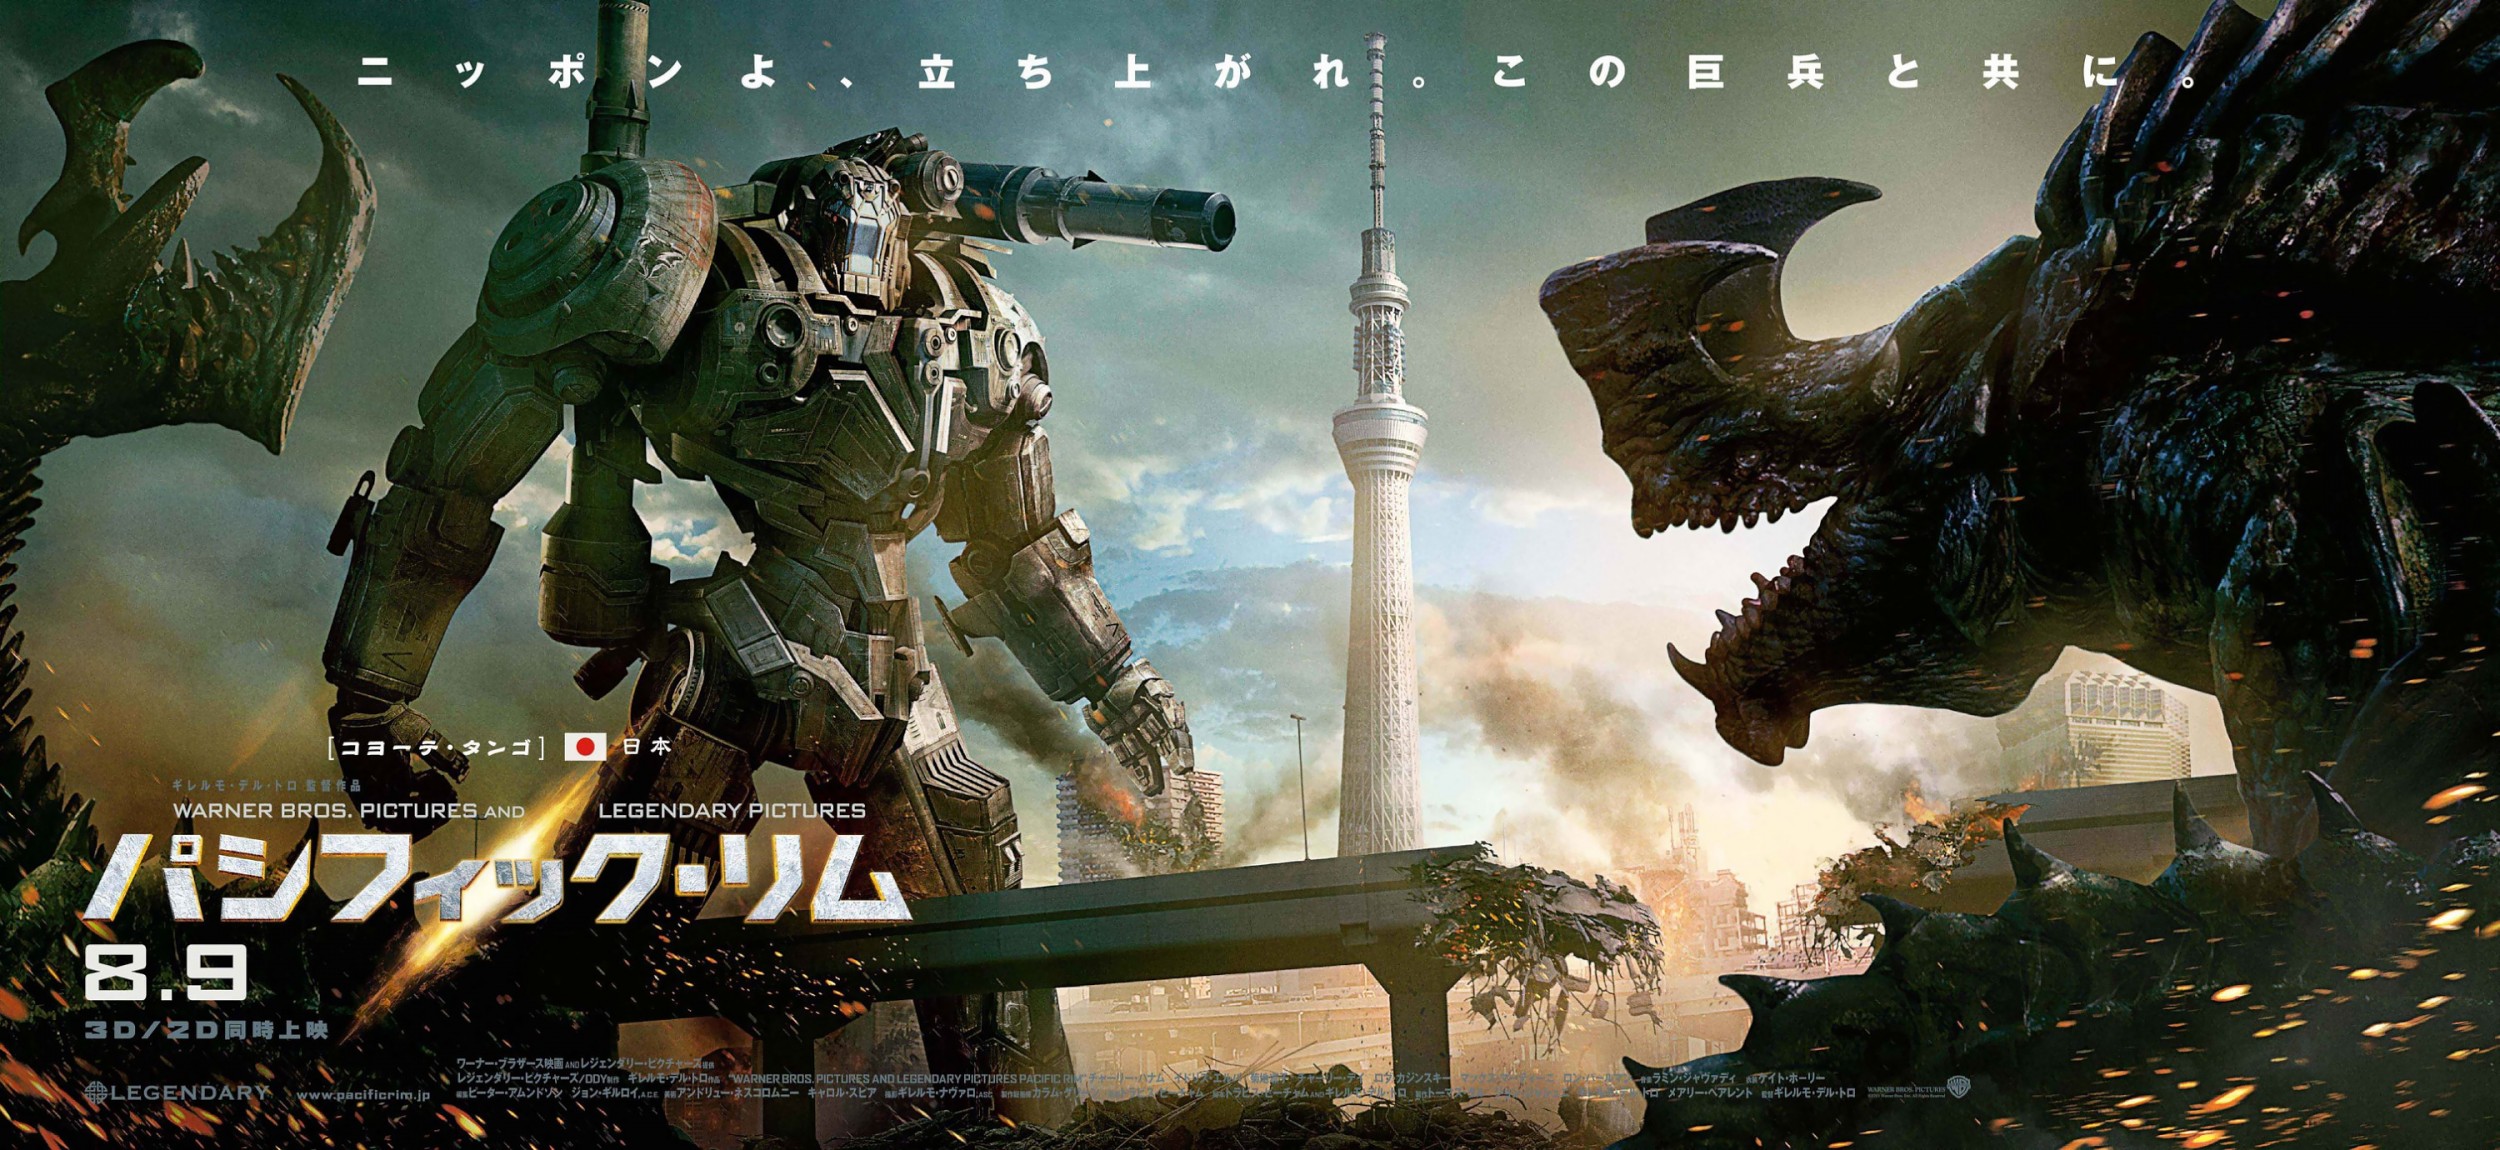 Mega Sized Movie Poster Image for Pacific Rim (#18 of 26)